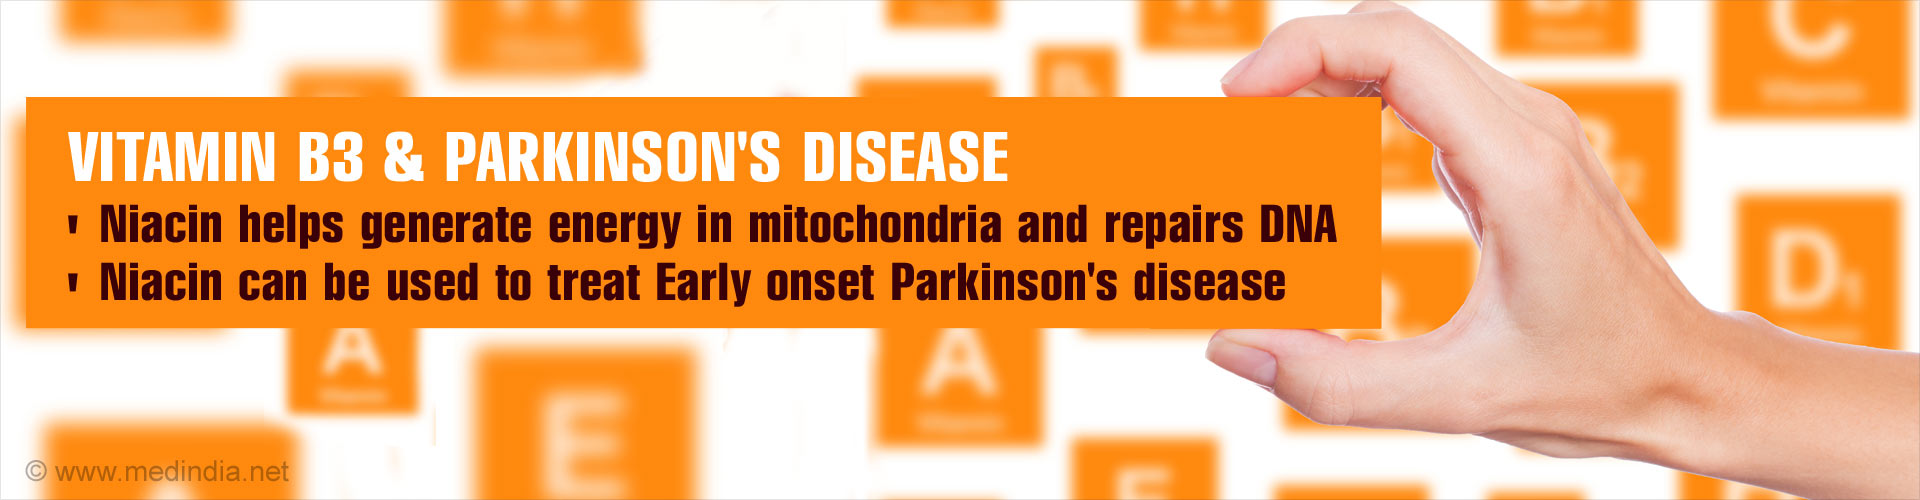 Vitamin B3 & Parkinson's Disease
- Niacin helps generate energy in mitochondria and repairs DNA
- Niacin can be used to treat early onset Parkinson's disease